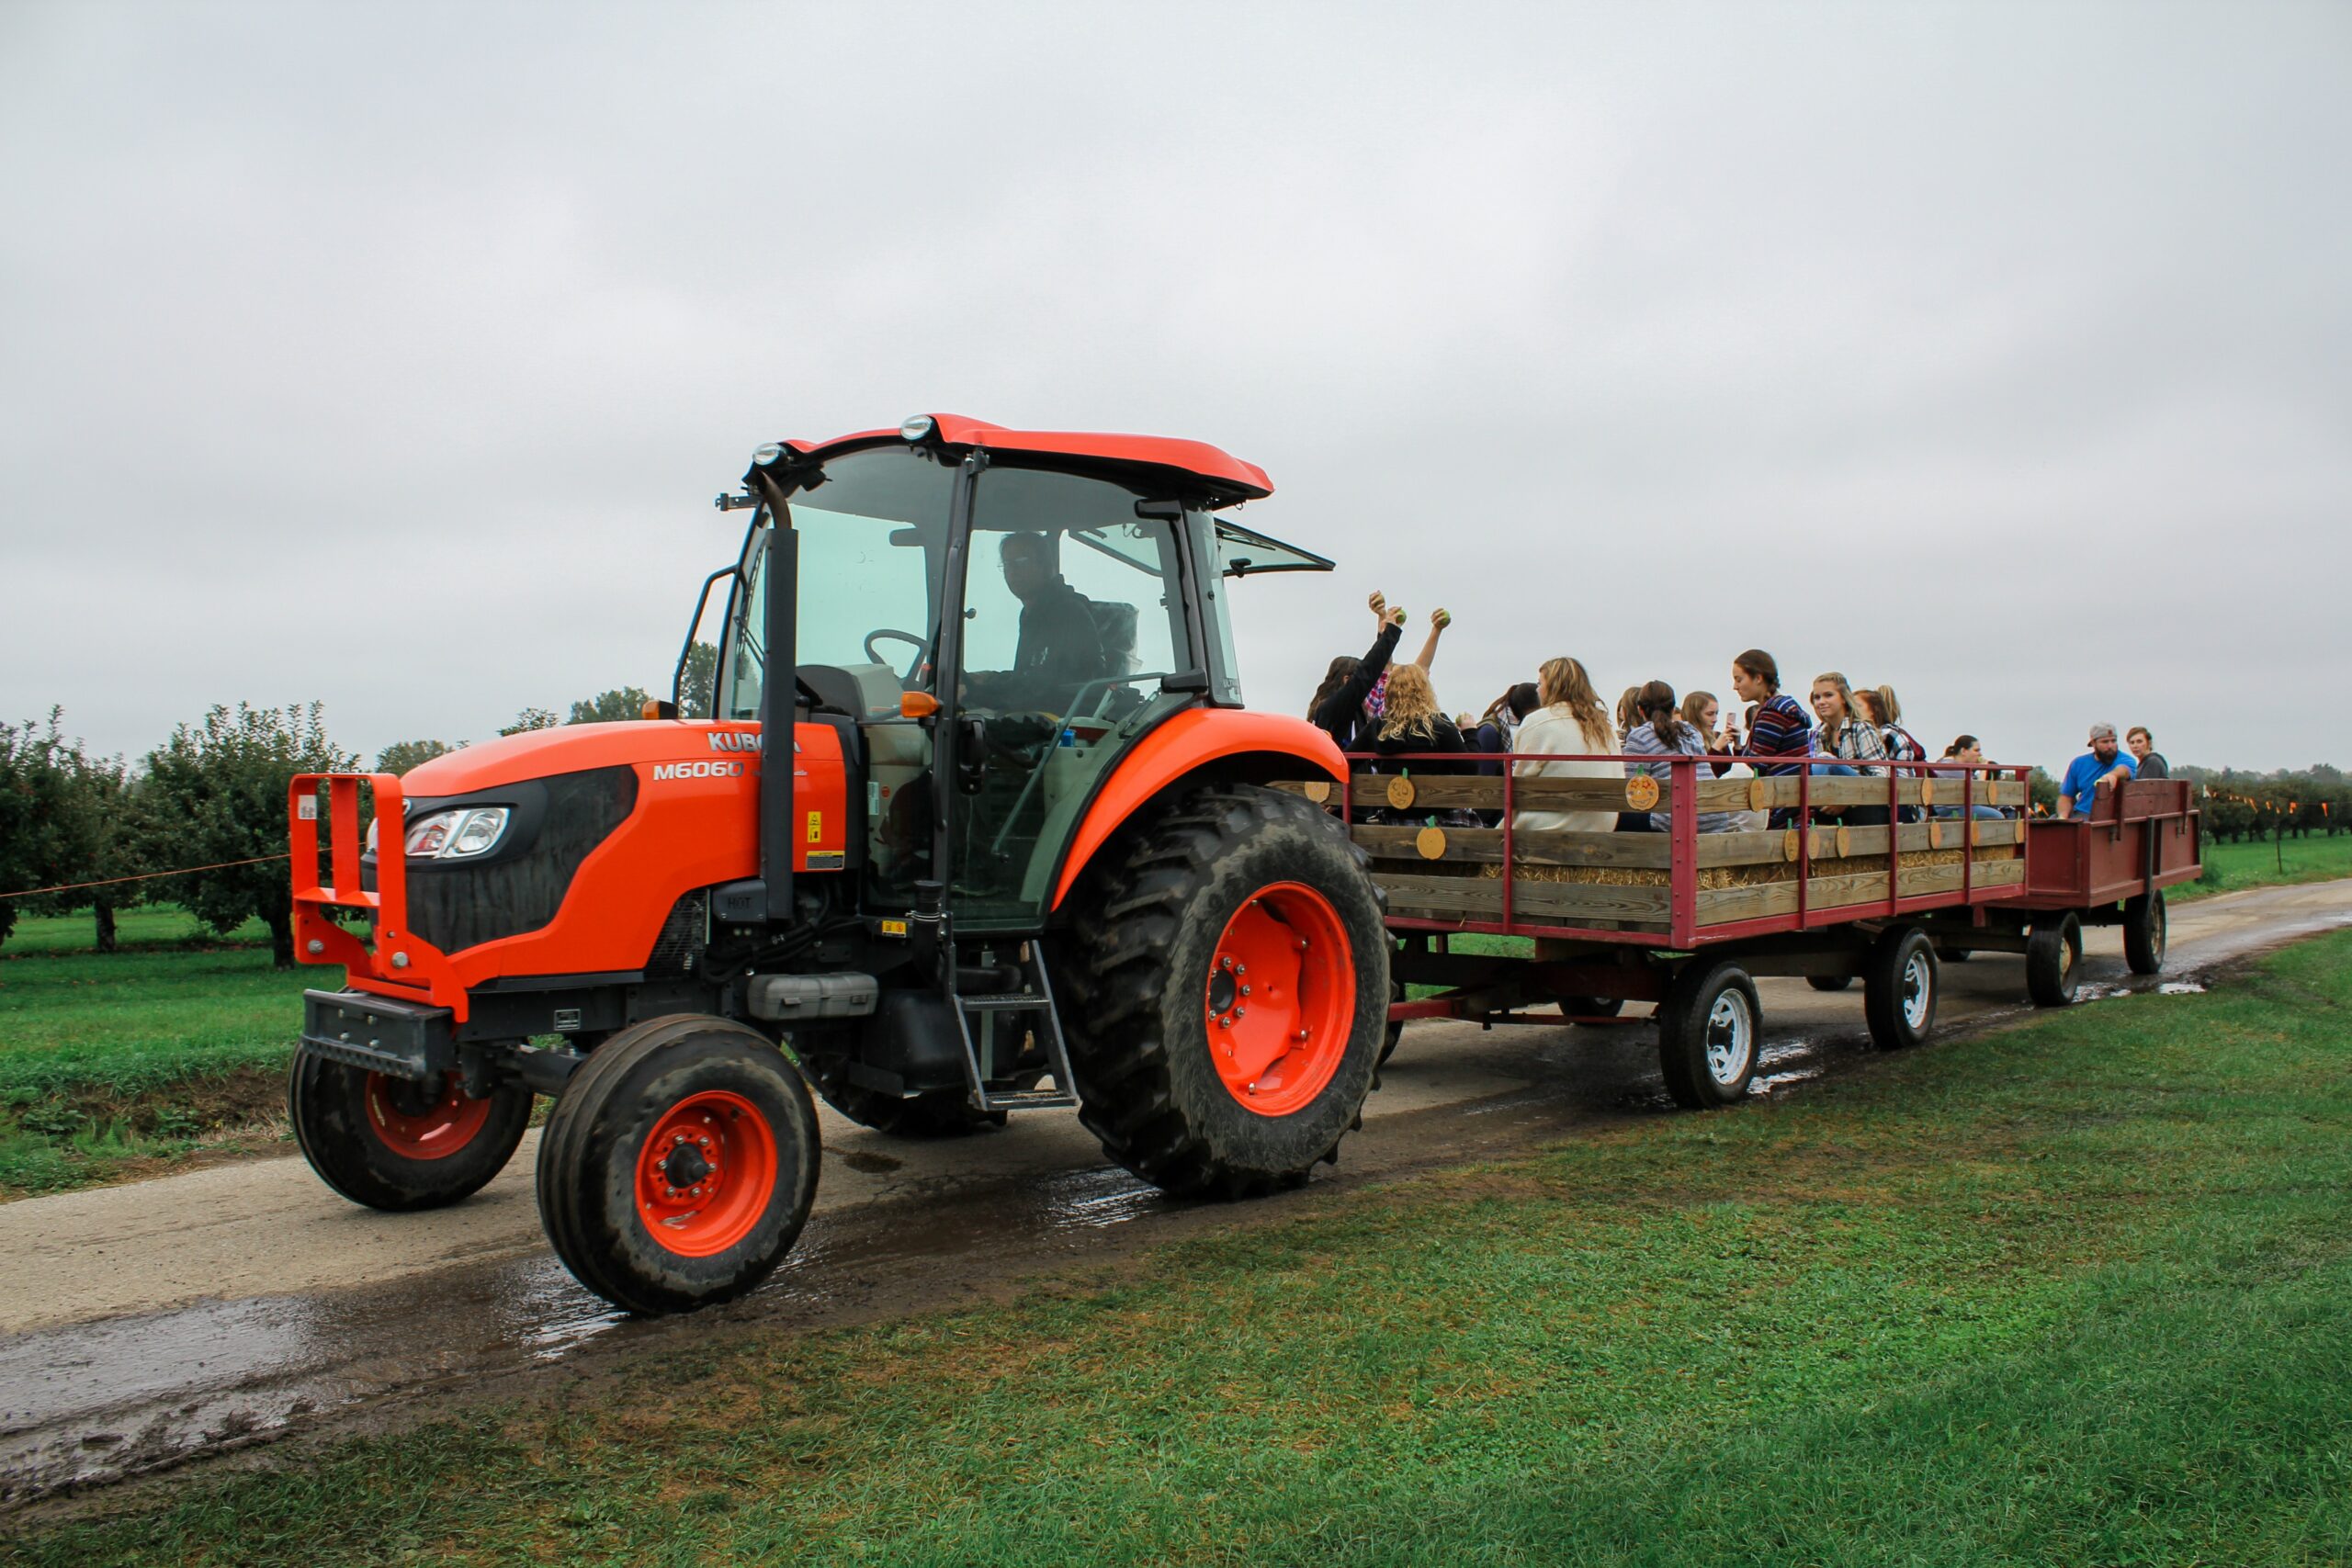 Tractor with people visiting farmland in cart